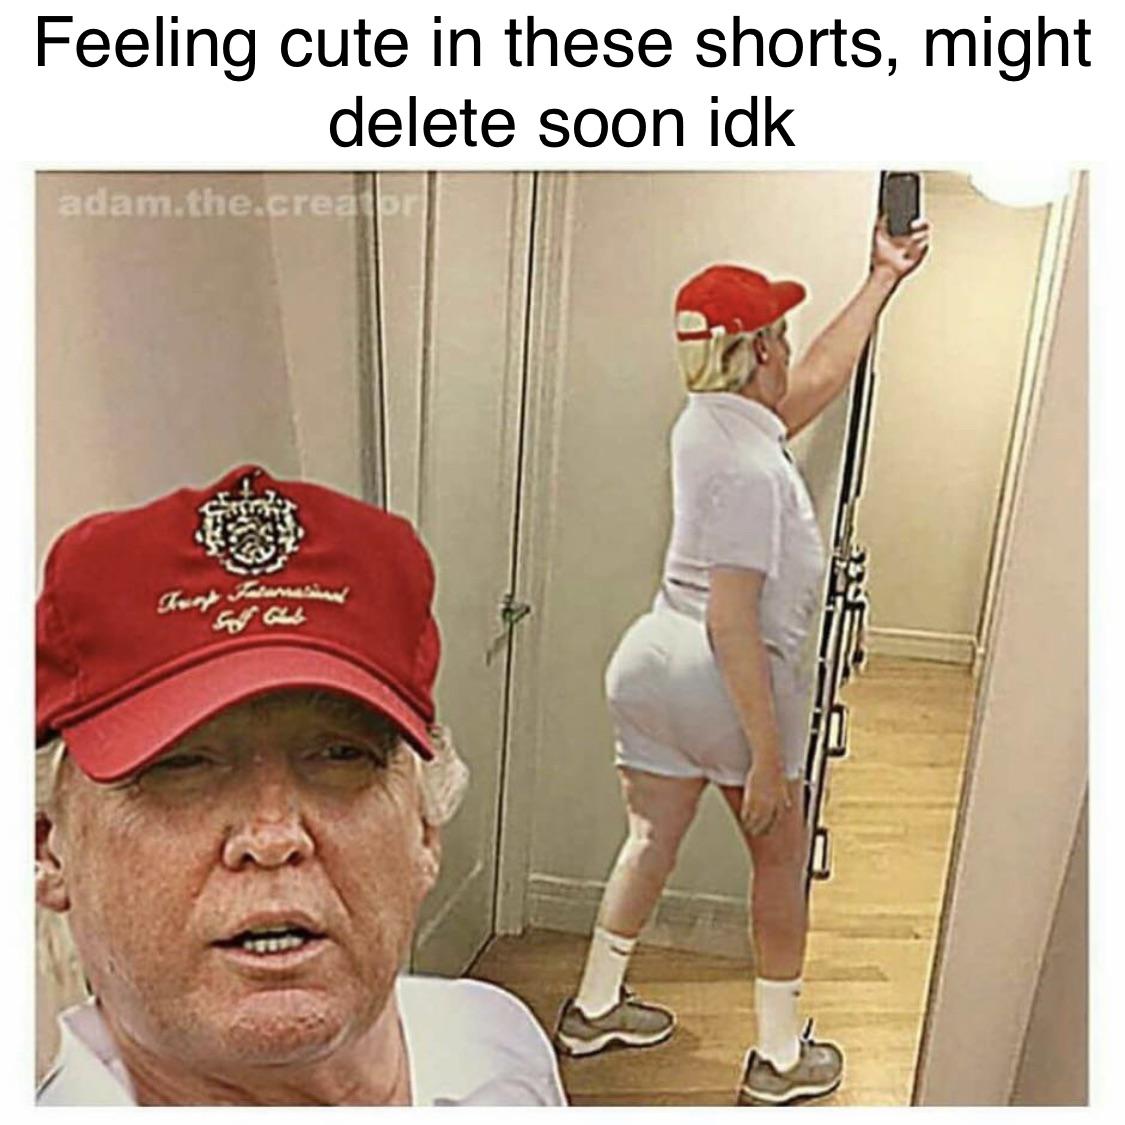 donald trump thicc - Feeling cute in these shorts, might delete soon idk adam.the.create So Good